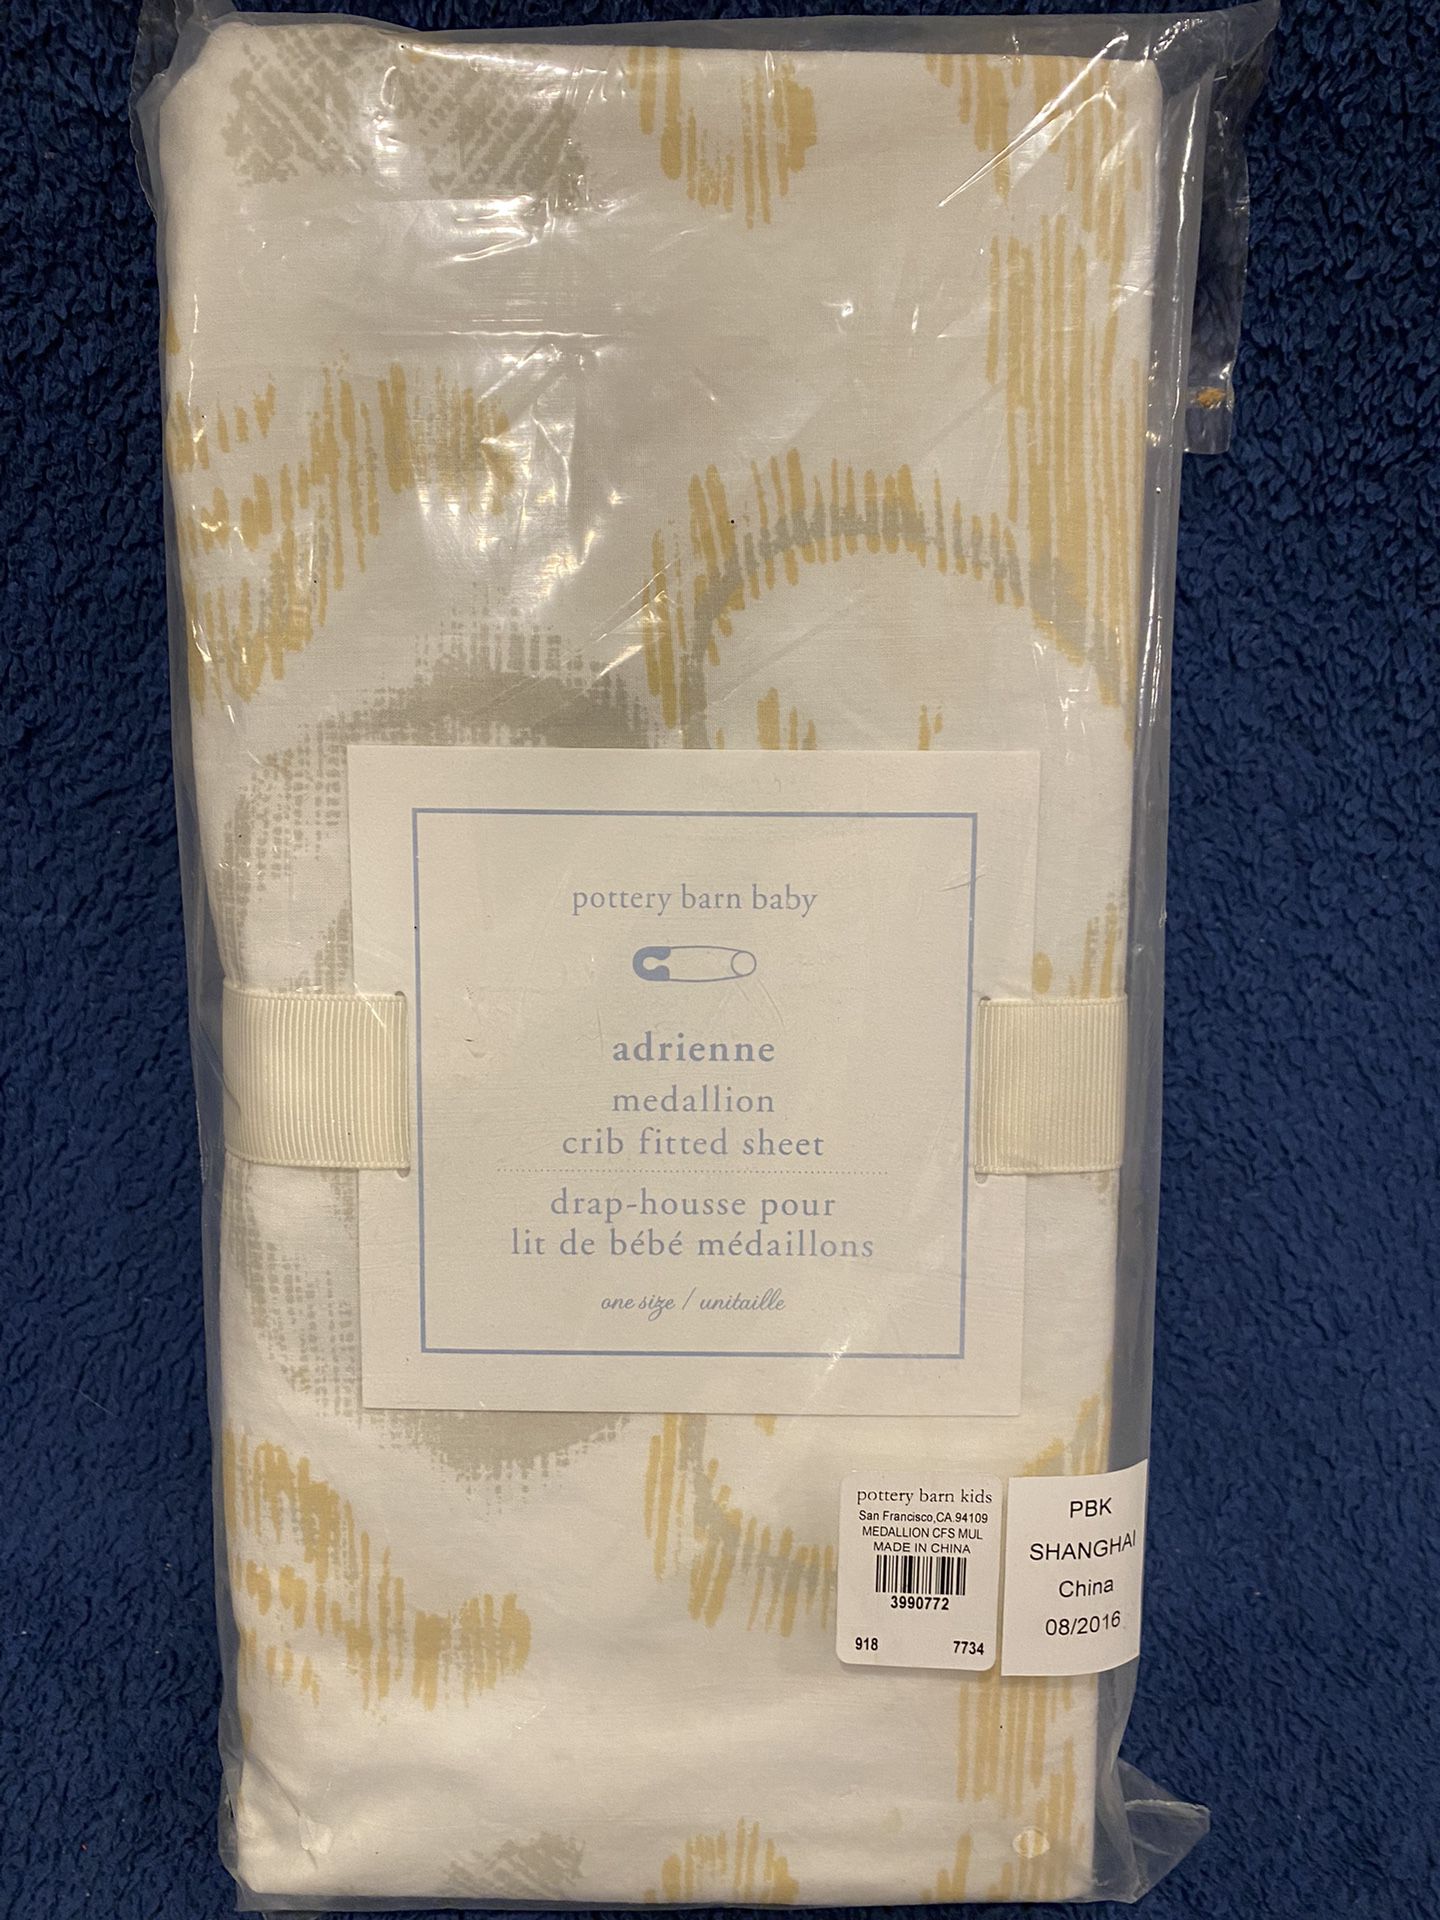 NEW Pottery Barn Baby Adrienne Medallion Crib Fitted Sheet Yellow & Gray 100% Cotton